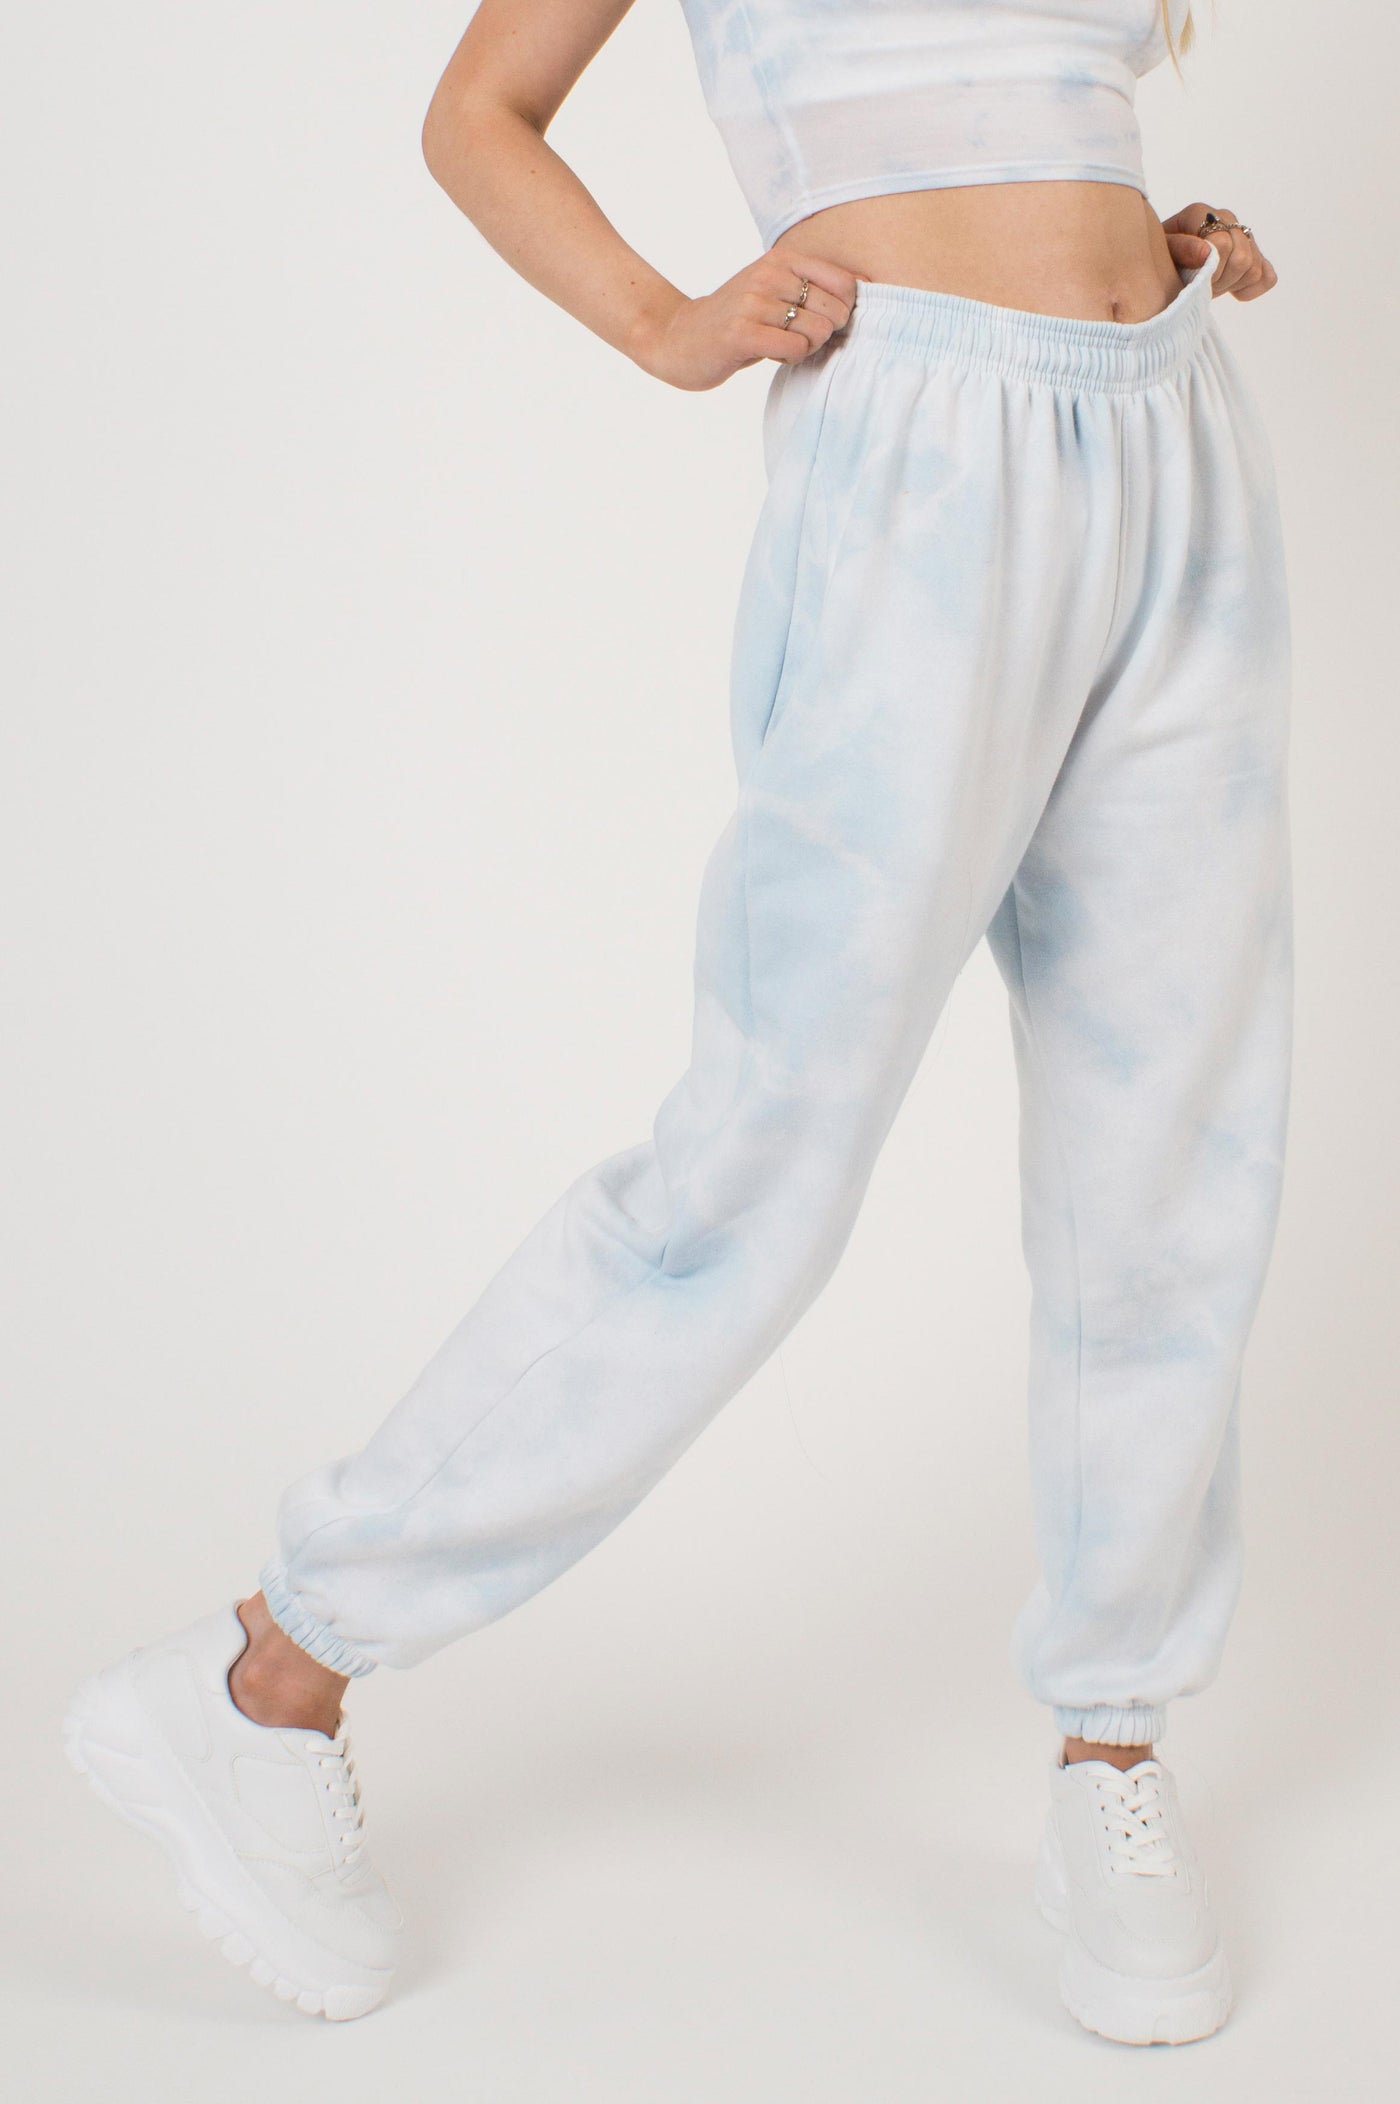 Baby Blue Tie Dye Crop Top and Jogger Set